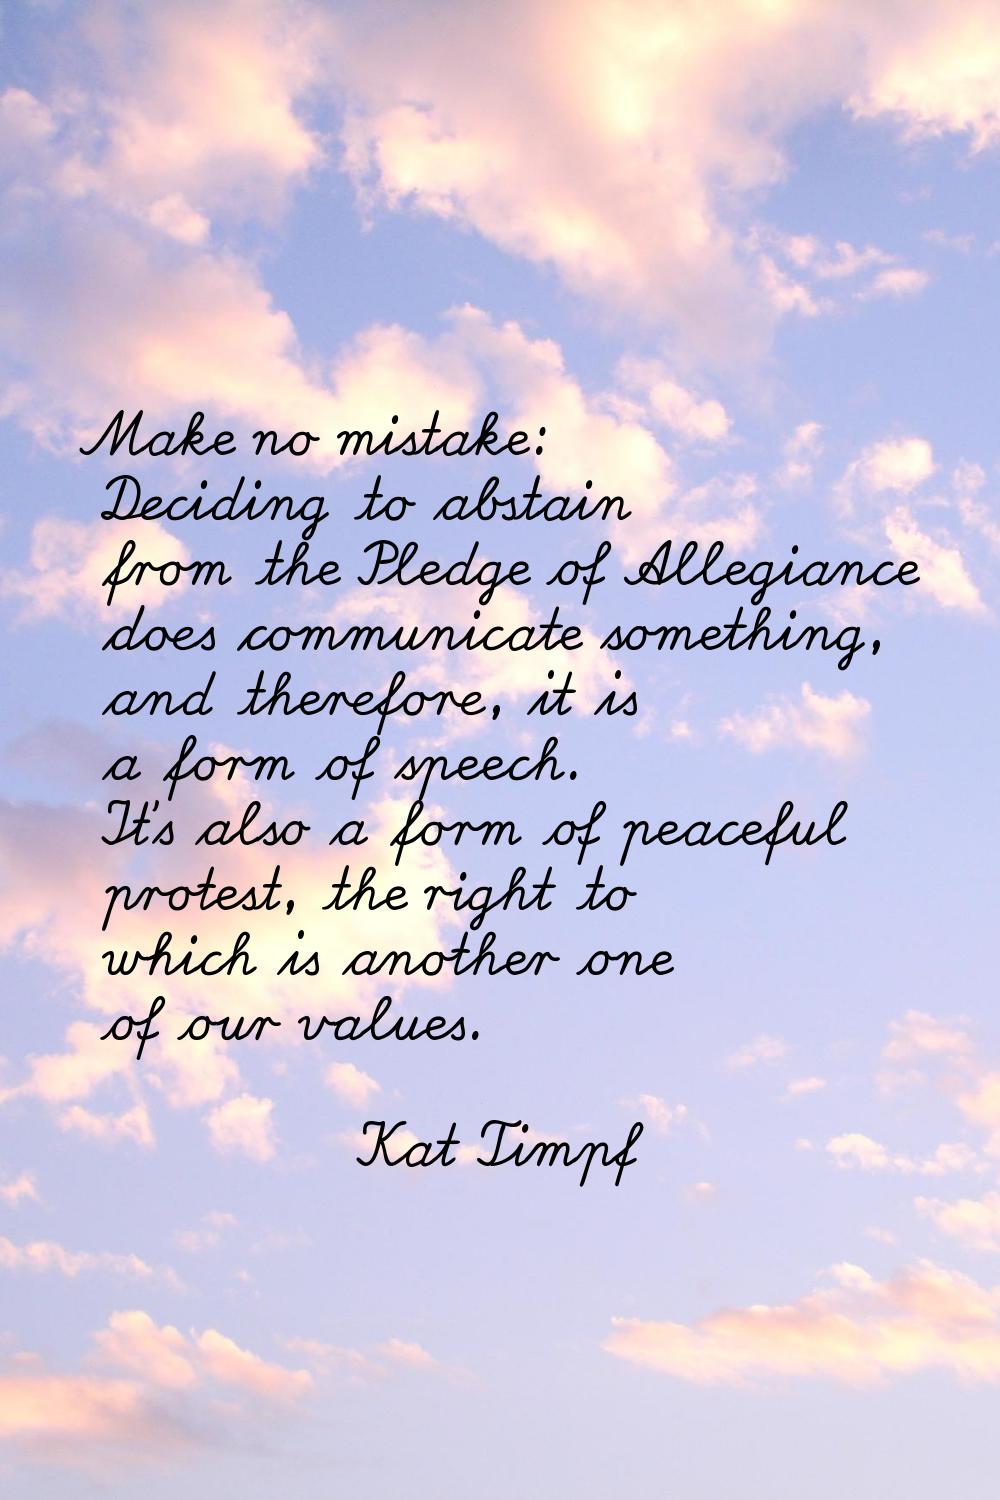 Make no mistake: Deciding to abstain from the Pledge of Allegiance does communicate something, and 